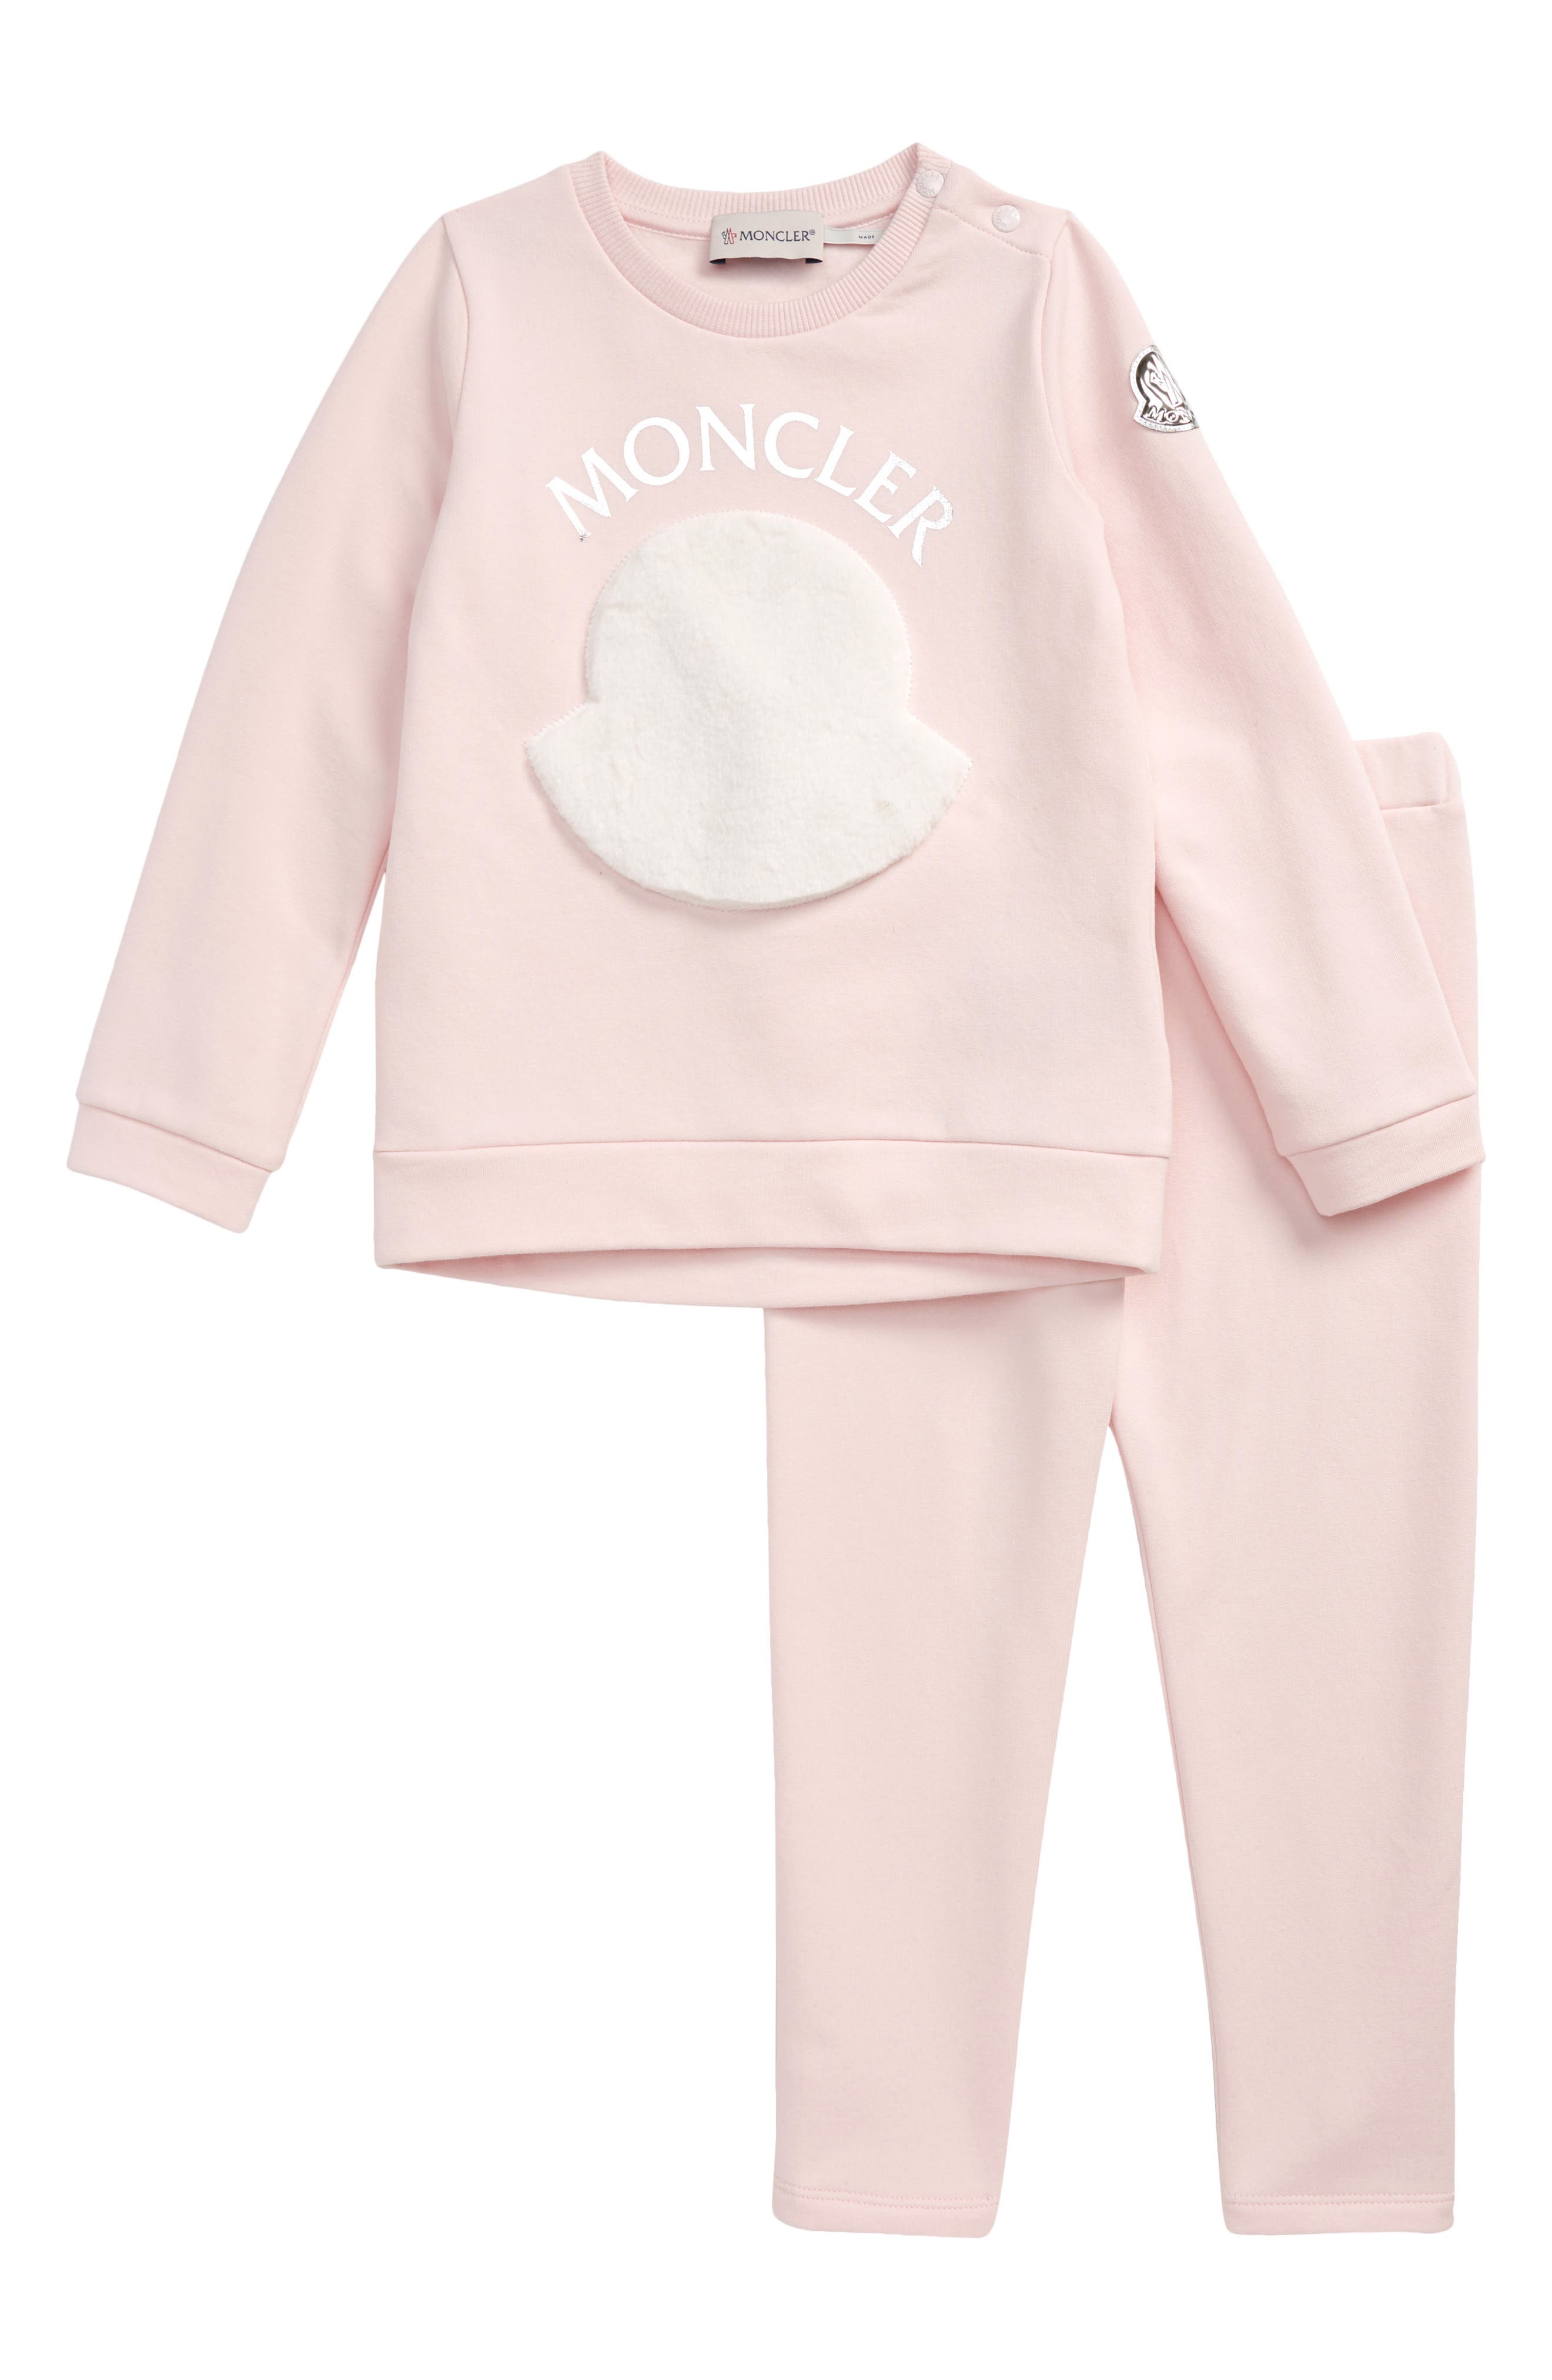 All Baby Boy Moncler Clothes | Nordstrom